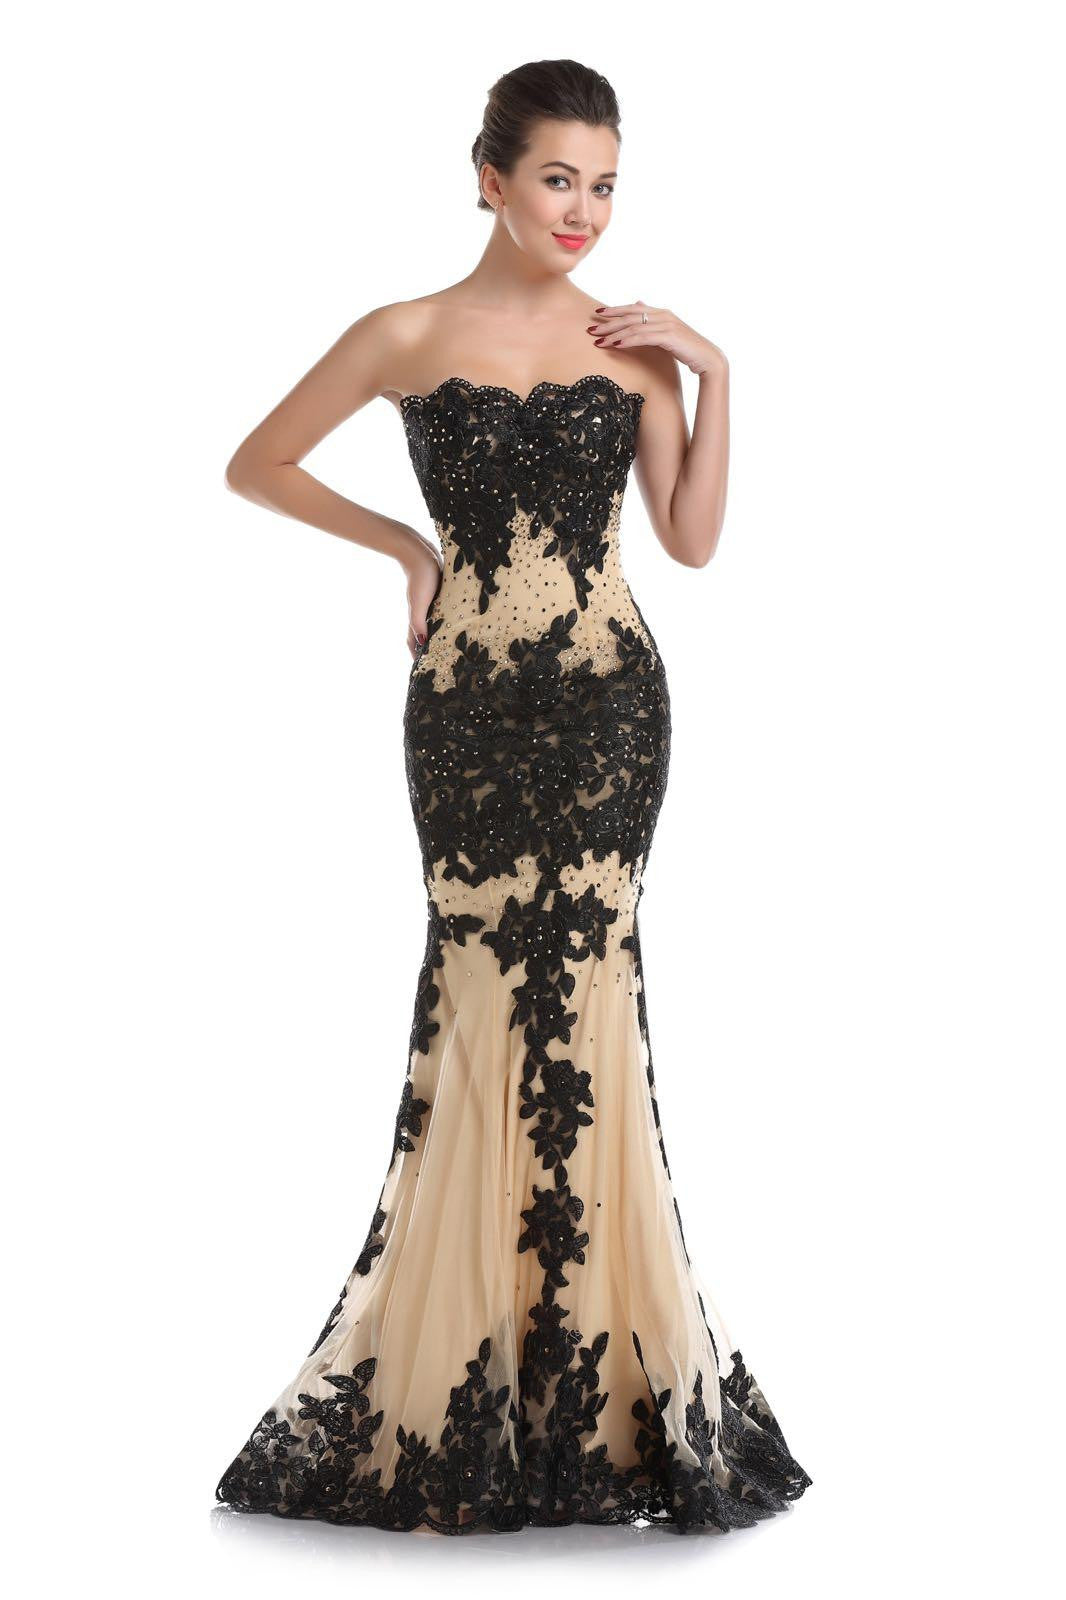 Strapless Illusion Fit and Flare Gown